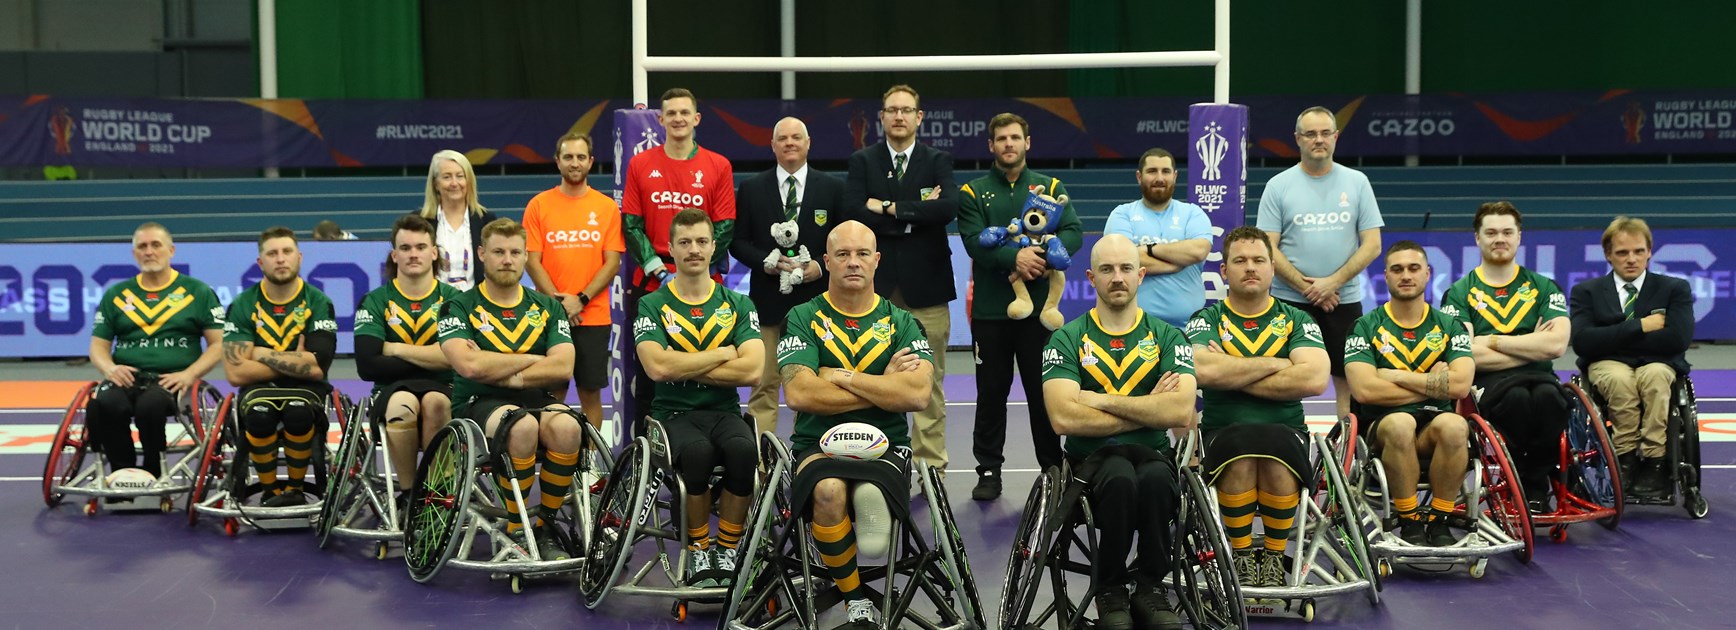 The Wheelaroos are third after reaching the World Cup semi-finals